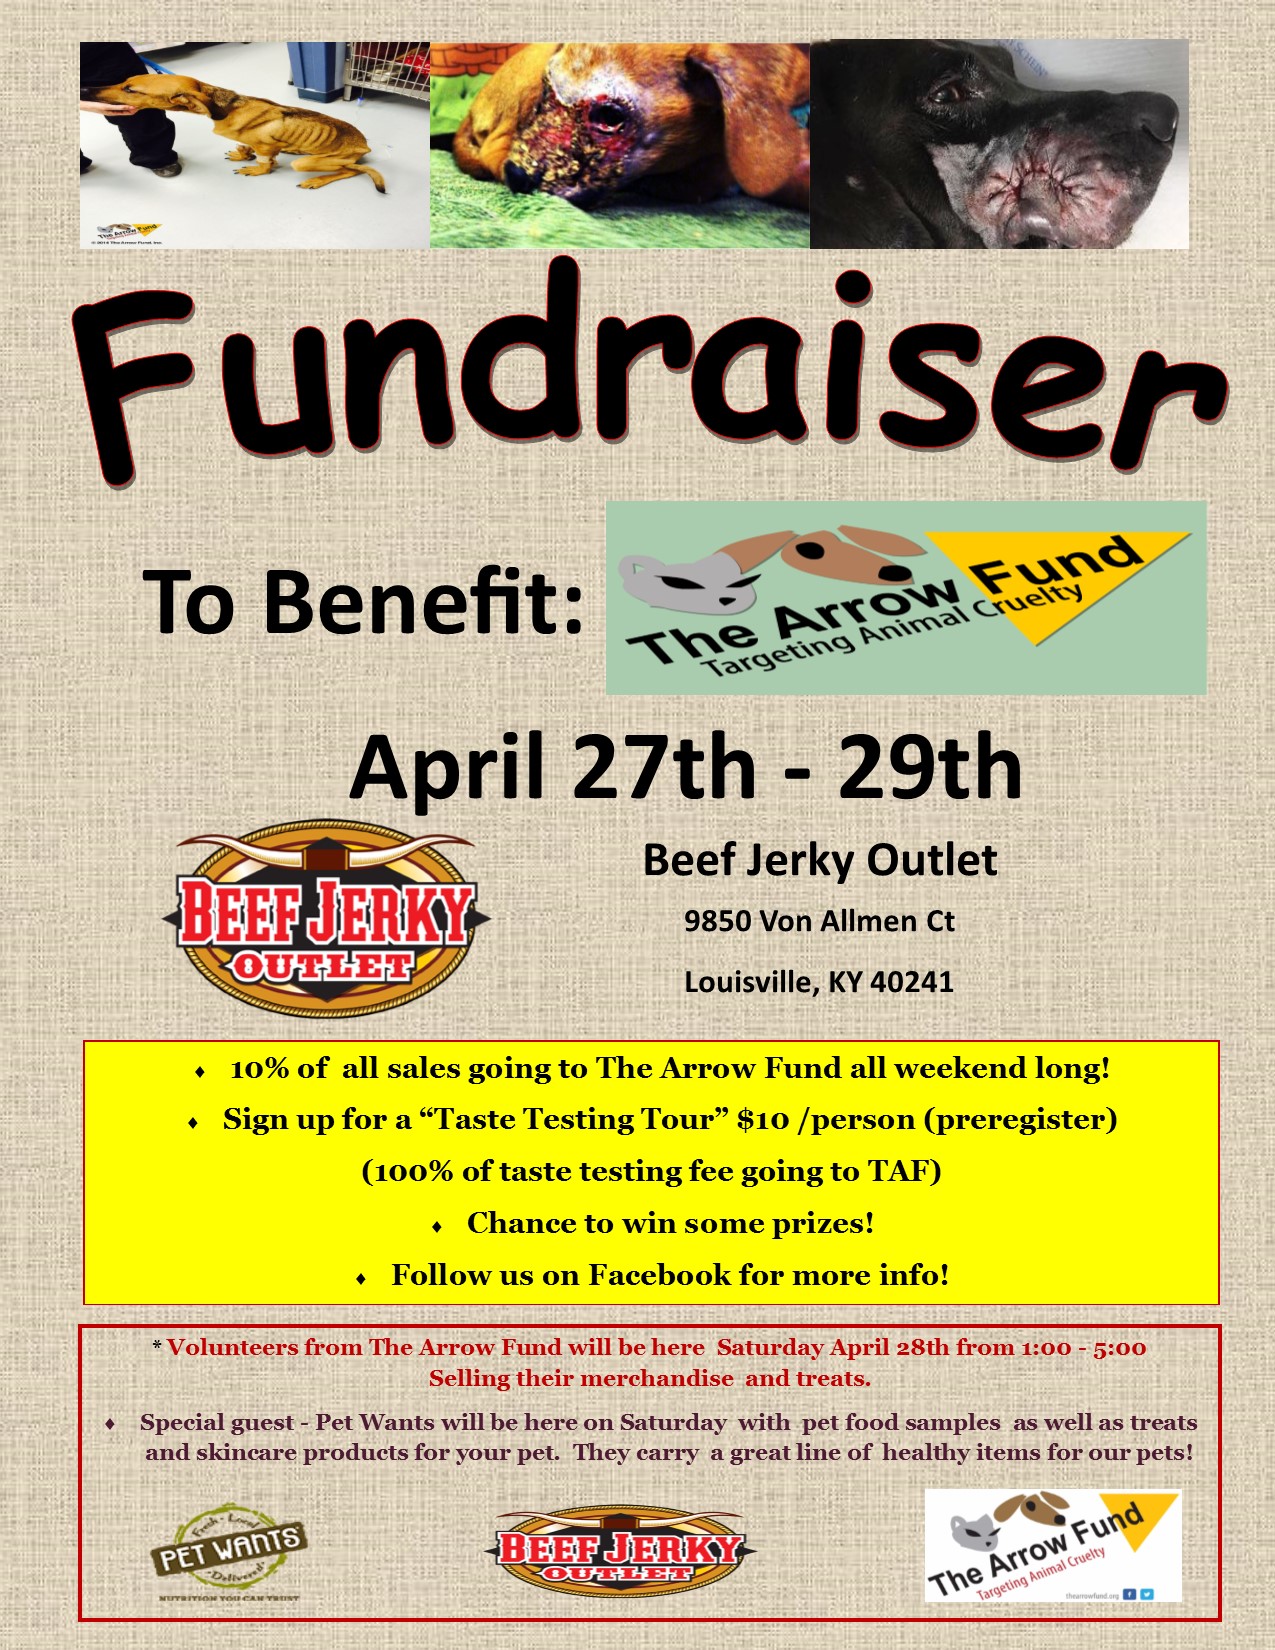 Fundraiser to benefit The Arrow Fund!